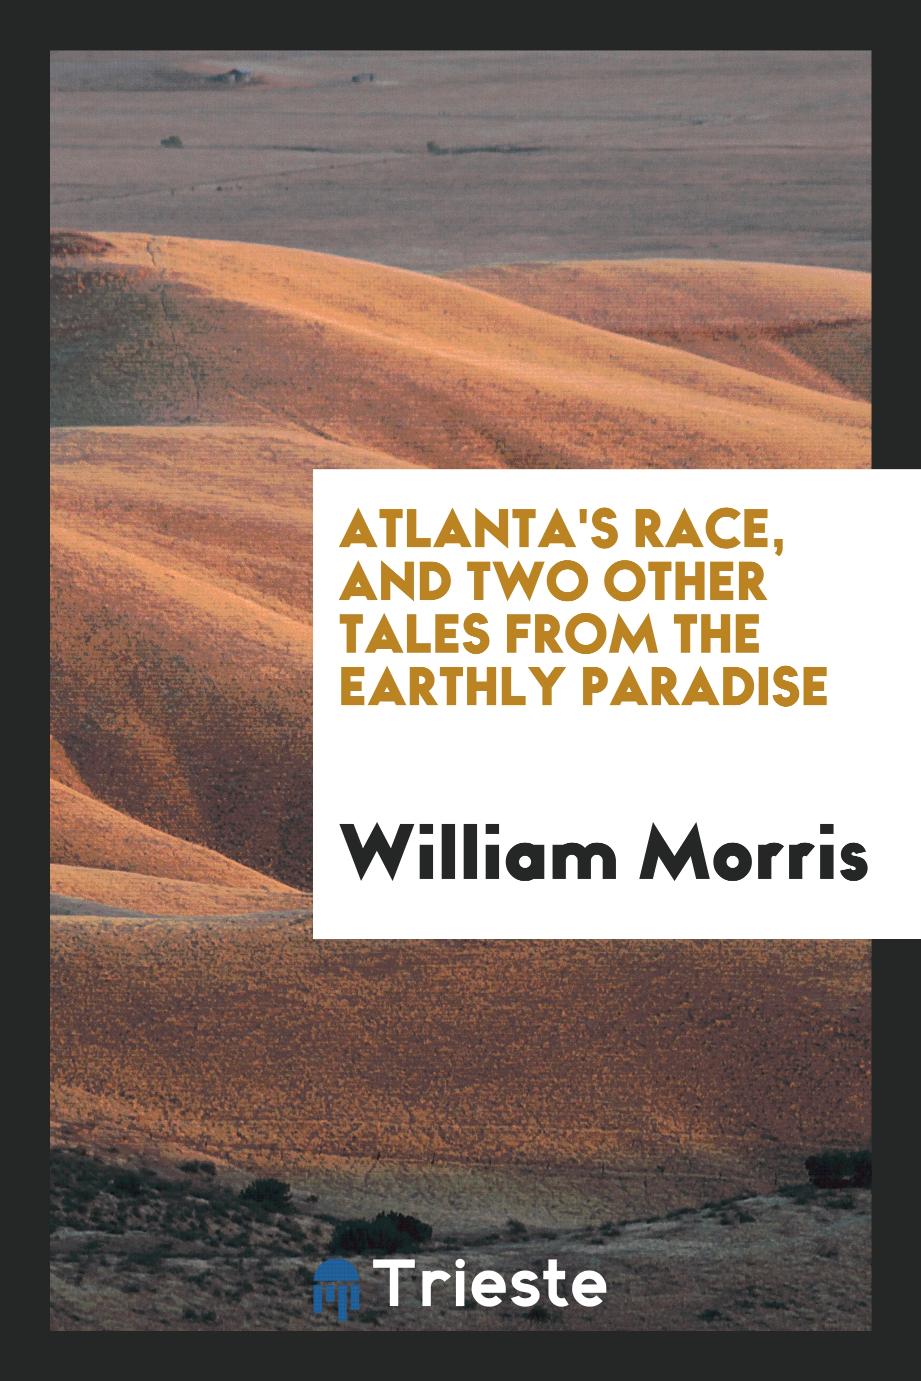 Atlanta's race, and two other tales from The earthly paradise